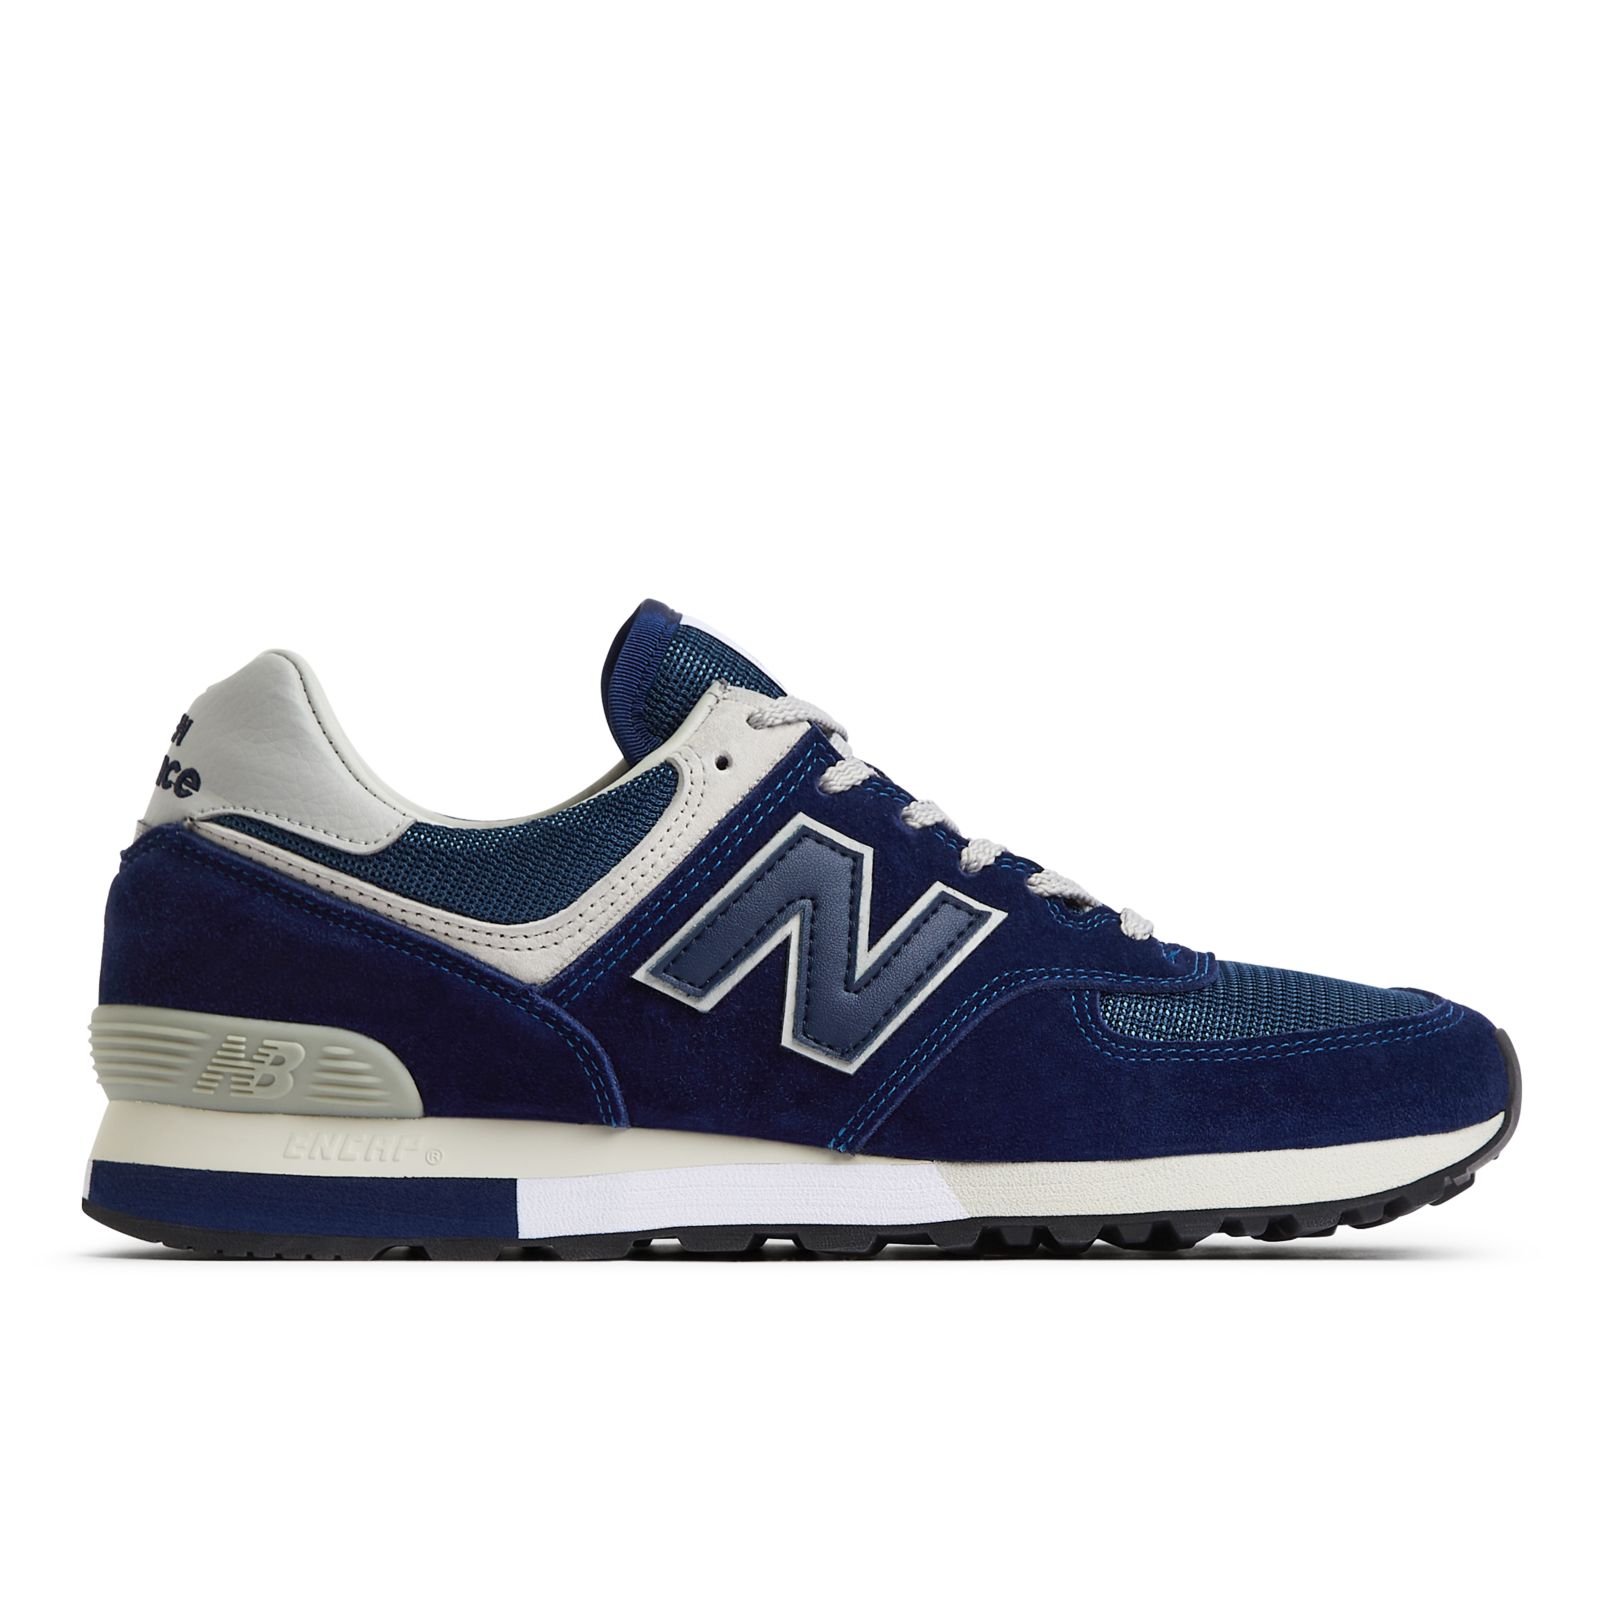 Unisex MADE in UK 576 35th Anniversary Shoes - New Balance